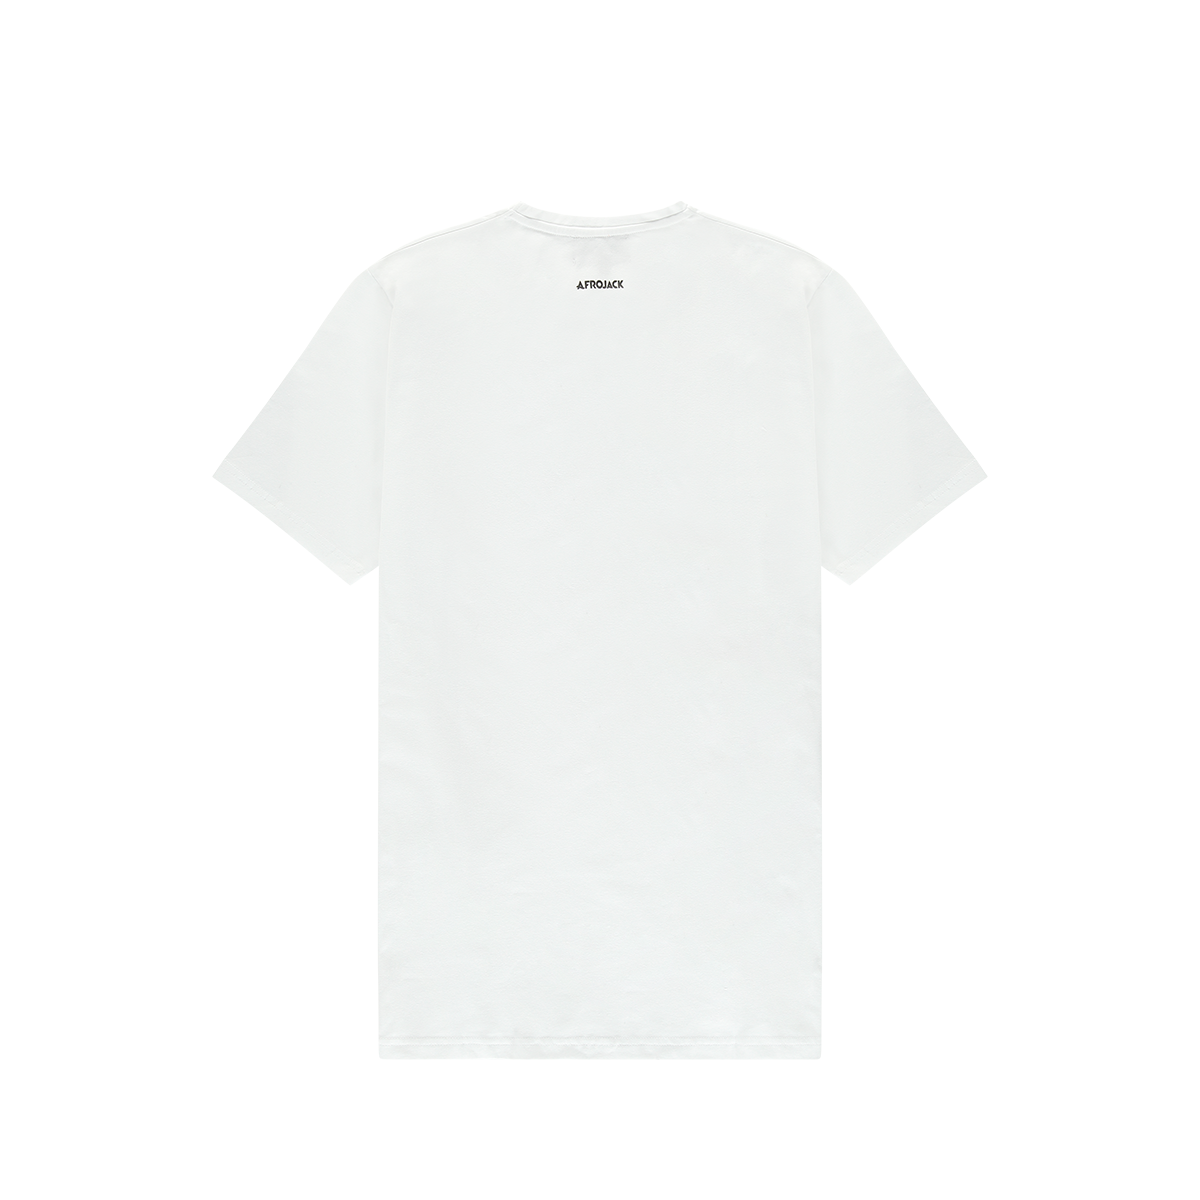 Afrojack_official-tshirt-white-back